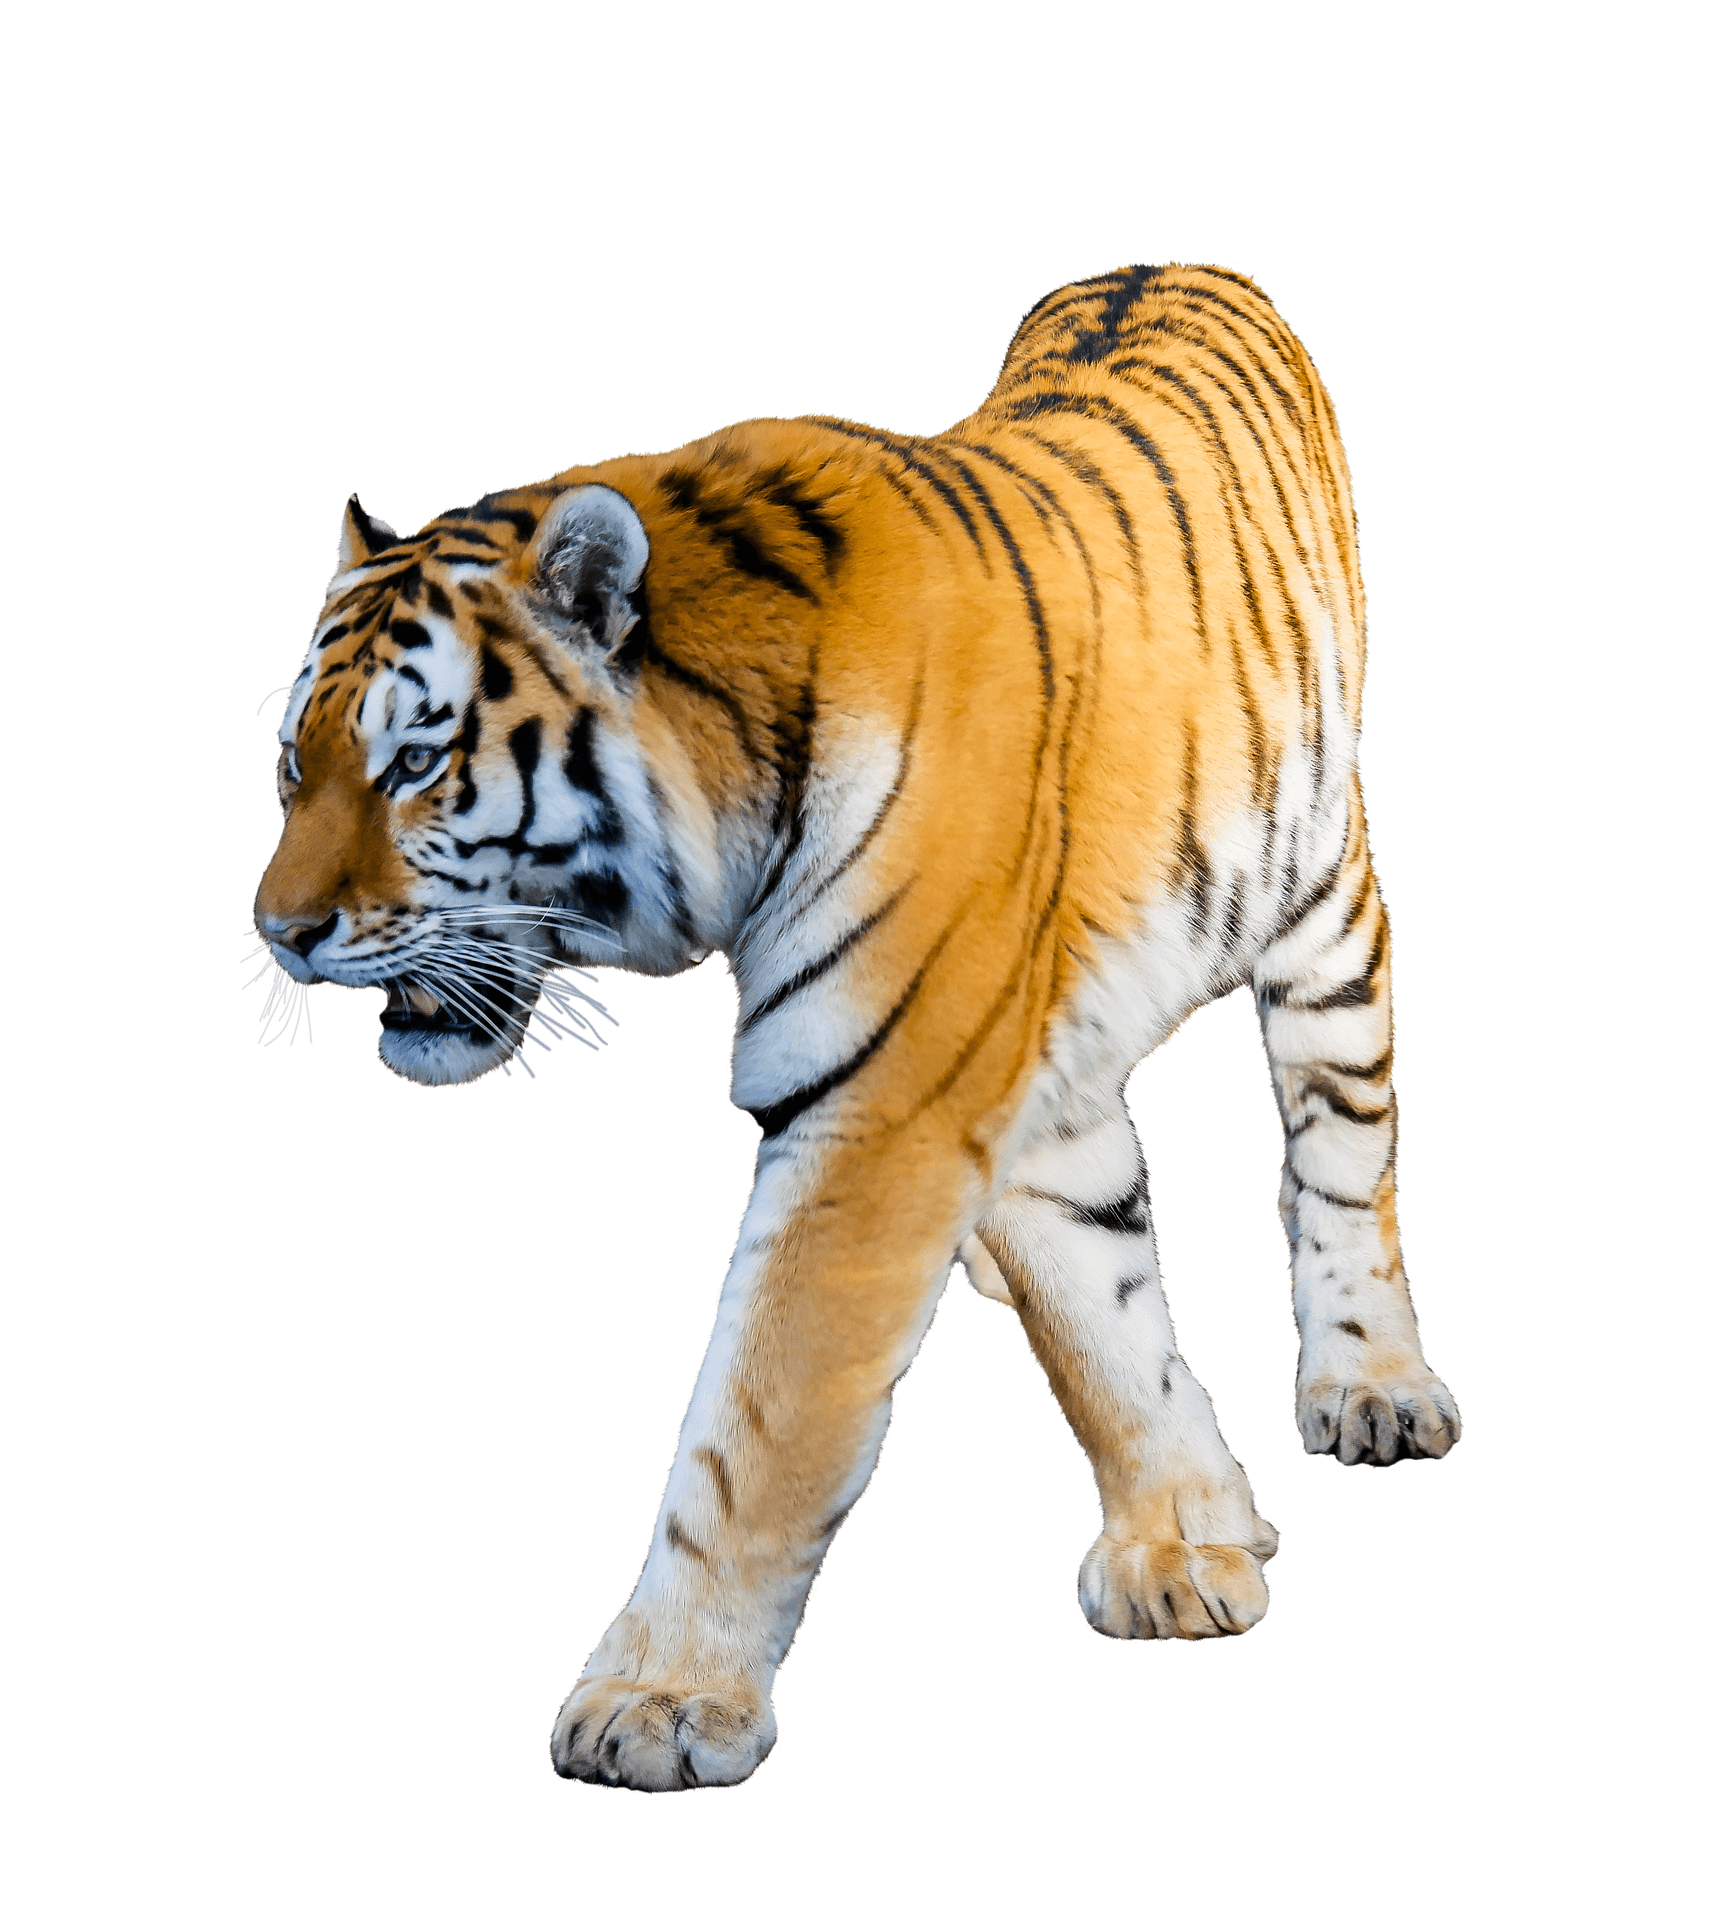 Tiger White Backgrounds - Wallpaper Cave